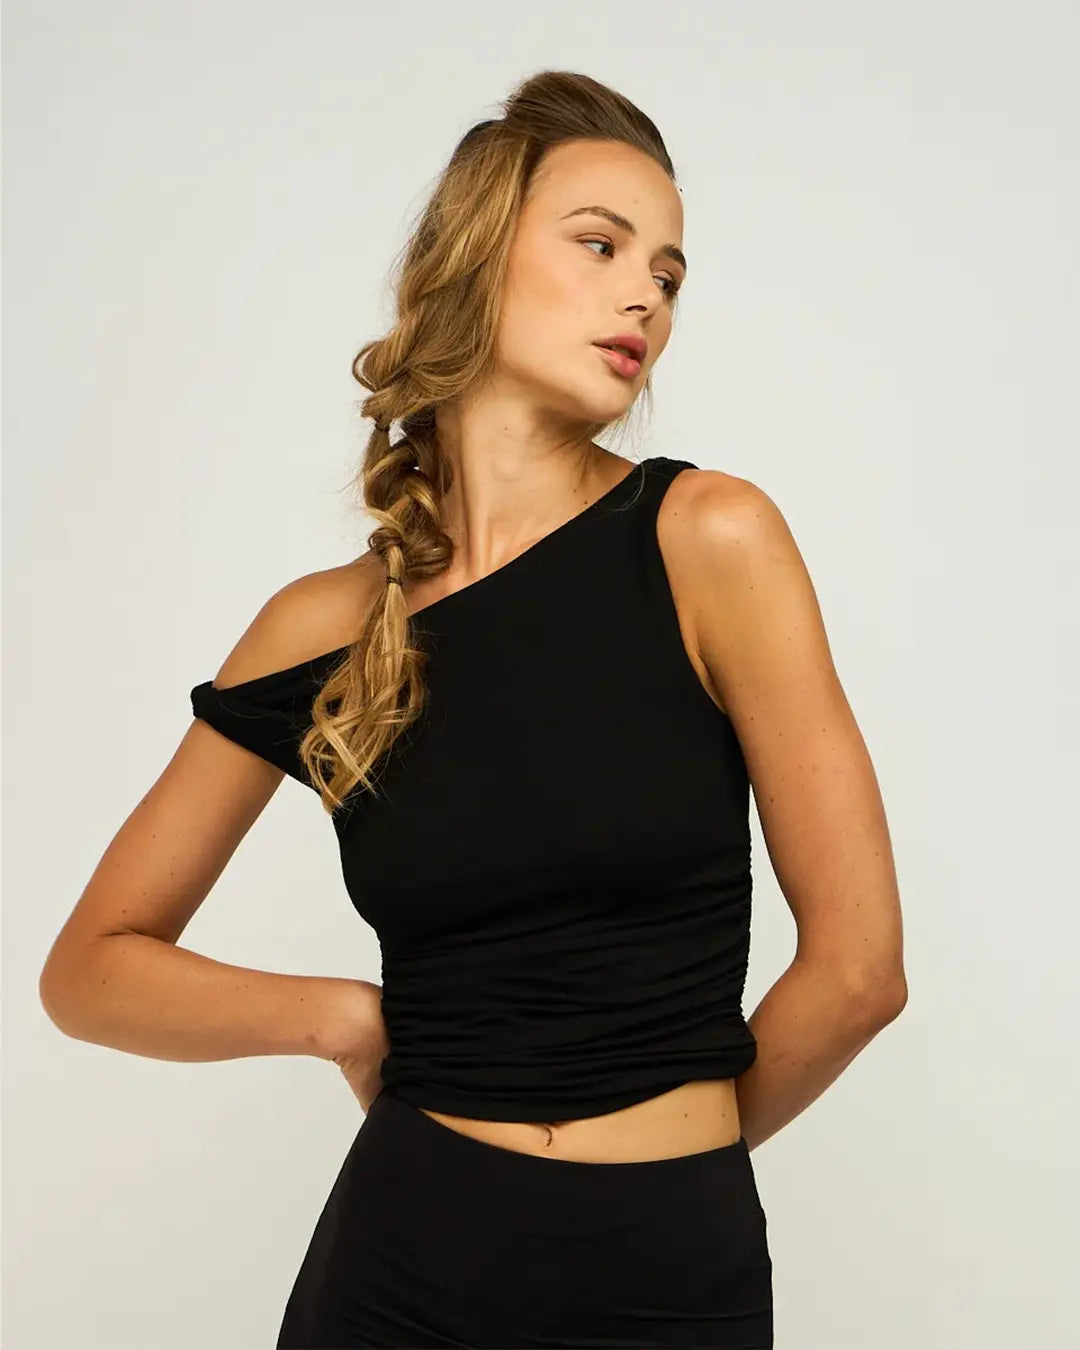 Be bold and trendy in our Hear Me Out Asymmetric Top. This one shoulder top is a must-have for spring outings. Its asymmetrical hem adds a touch of elegance to your wardrobe, making it the perfect elevated basic.